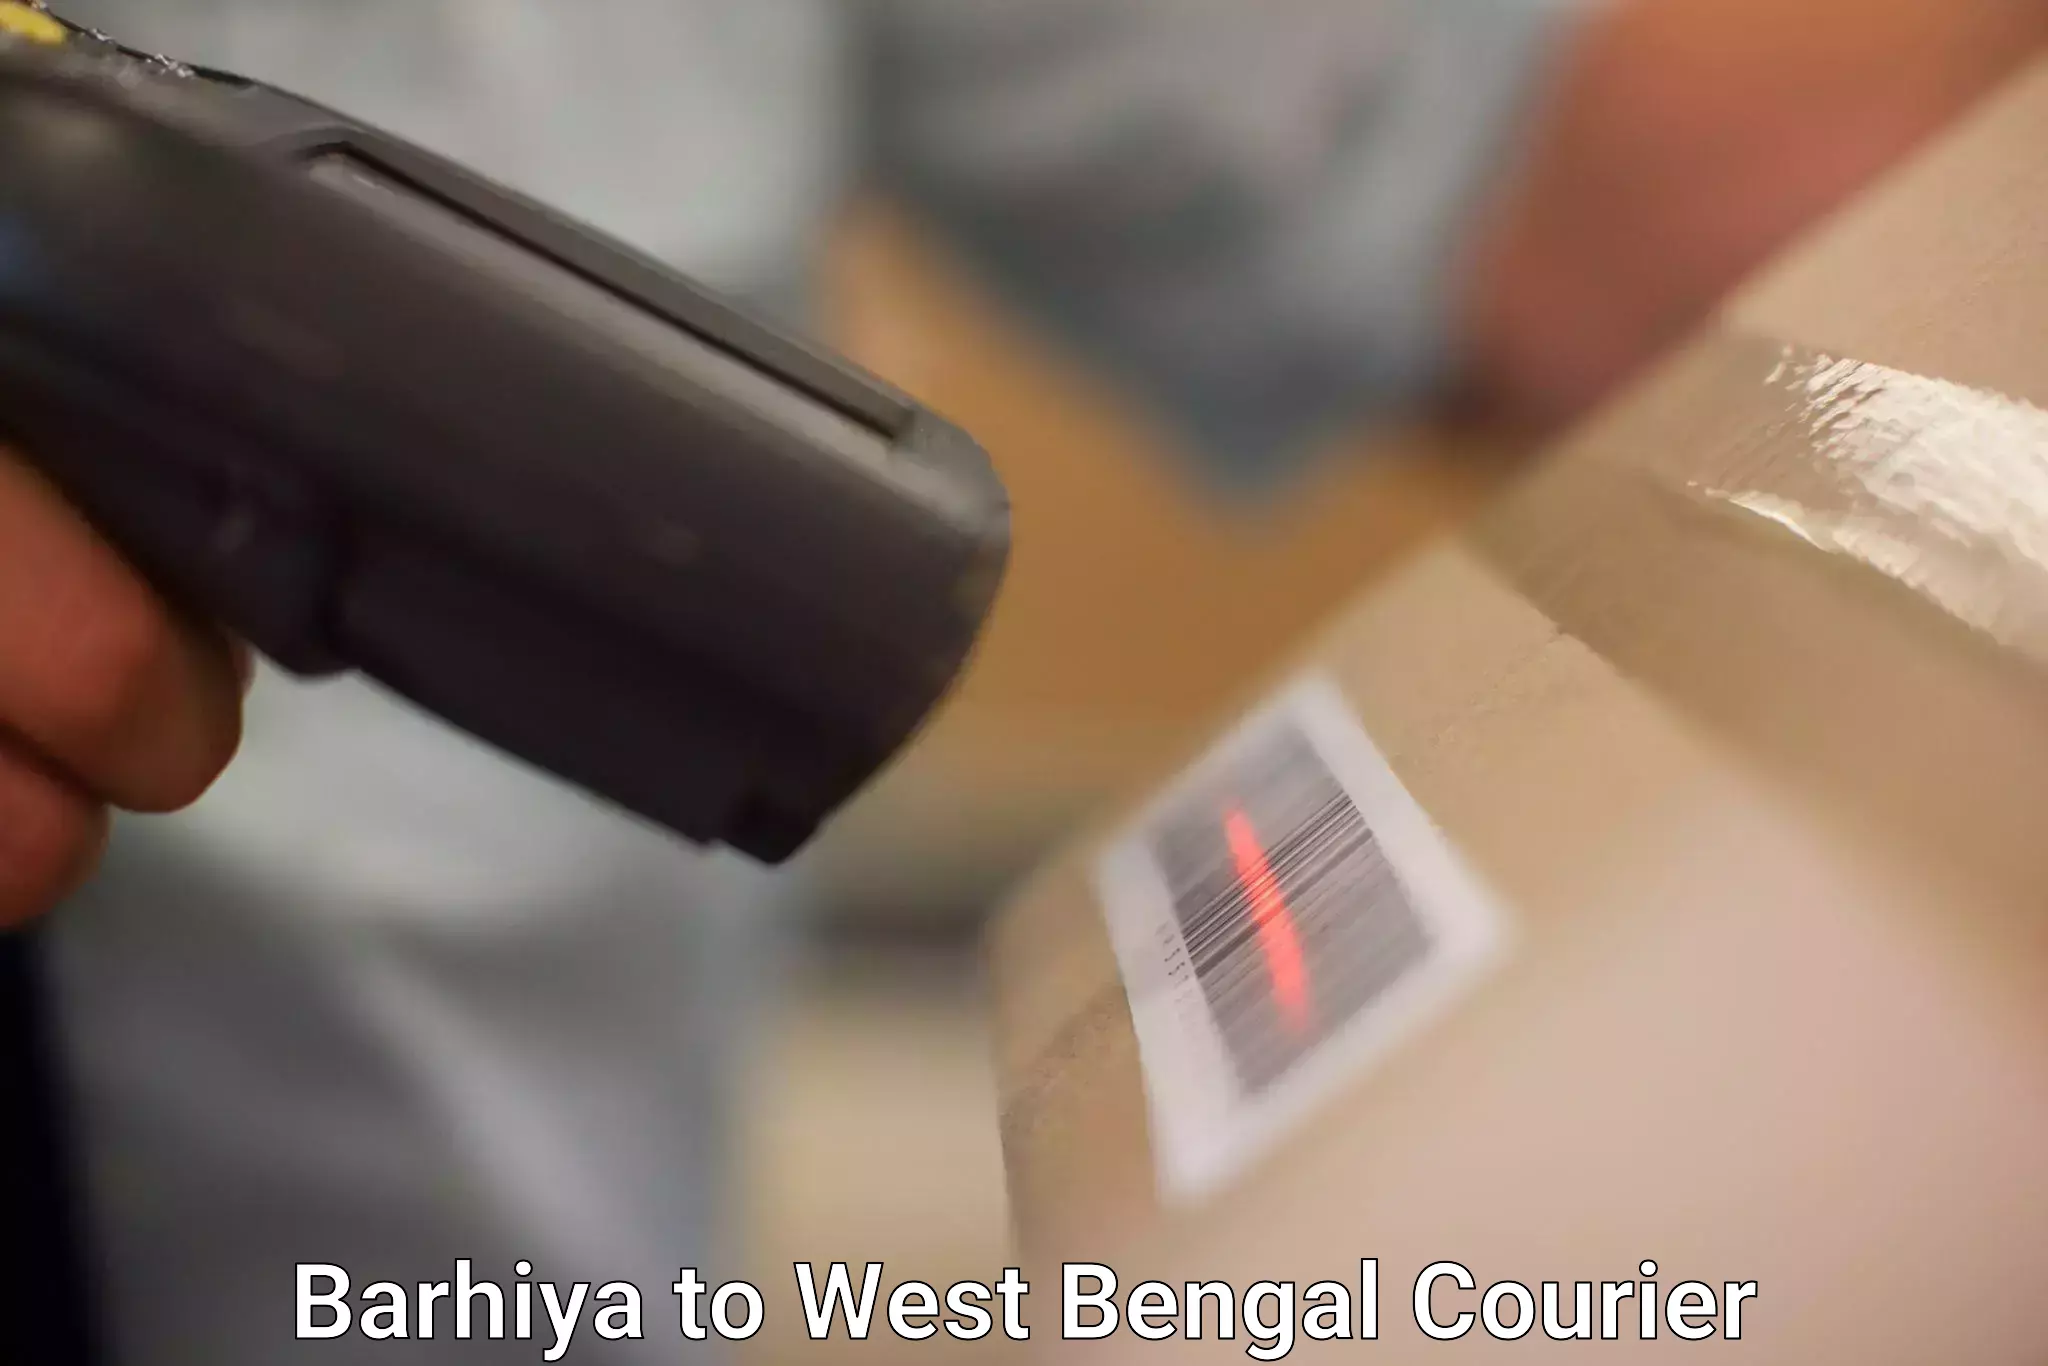 Personal courier services in Barhiya to Gangarampur